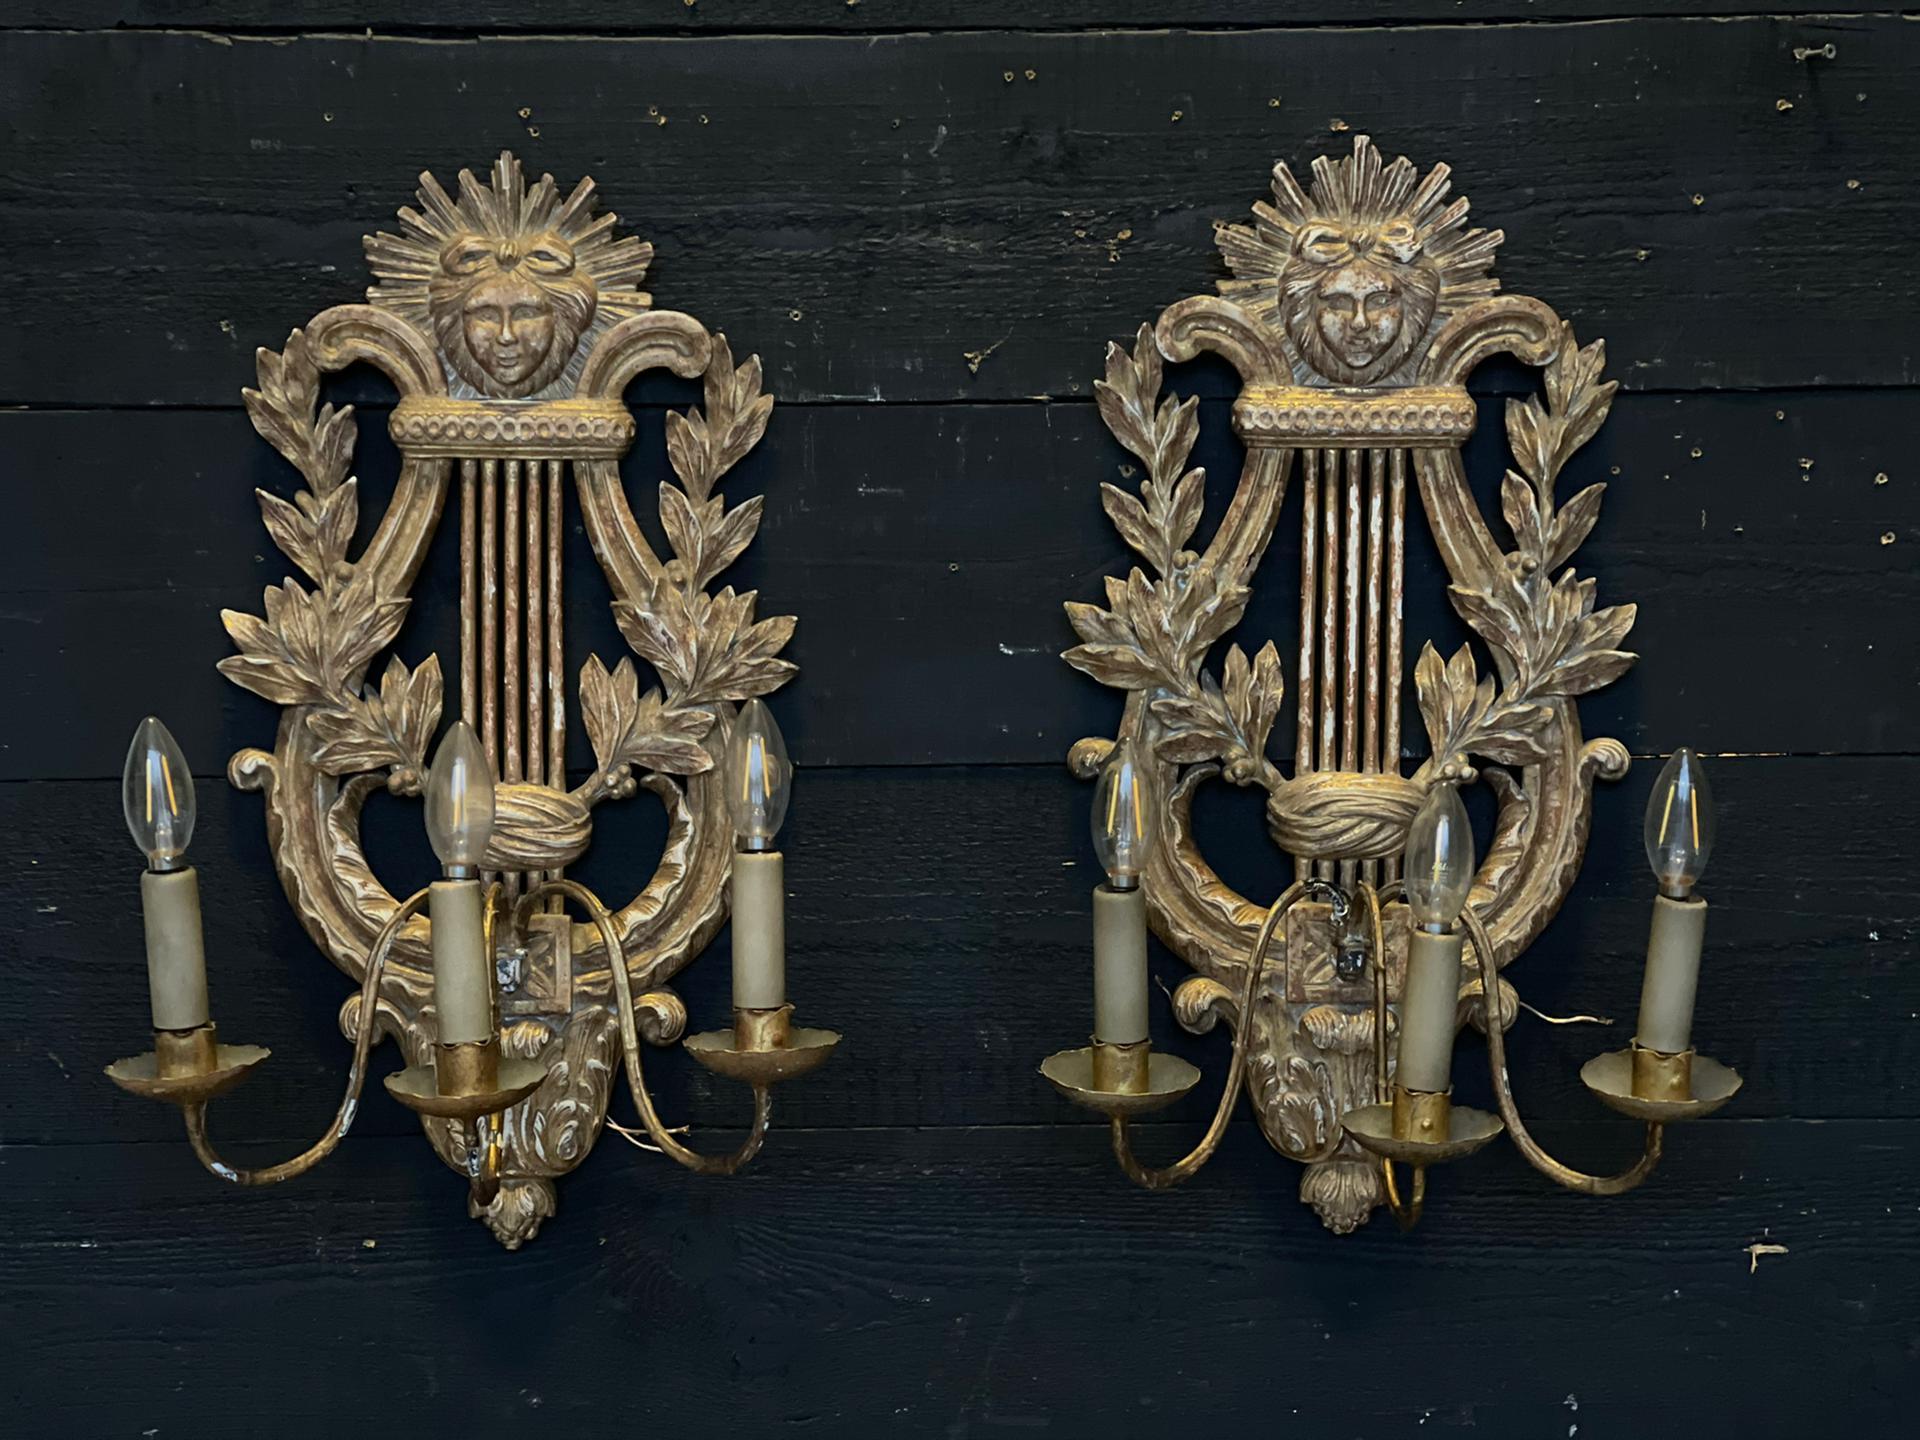 A superb pair of French Gilt Wood Wall Lights or Sconces. Dating to between 1900 and 1920. Carved wood with Gesso and gilded. These will need to be wired by a qualified electrician.
In excellent original condition.
Height 60 cm
Width 38 cm